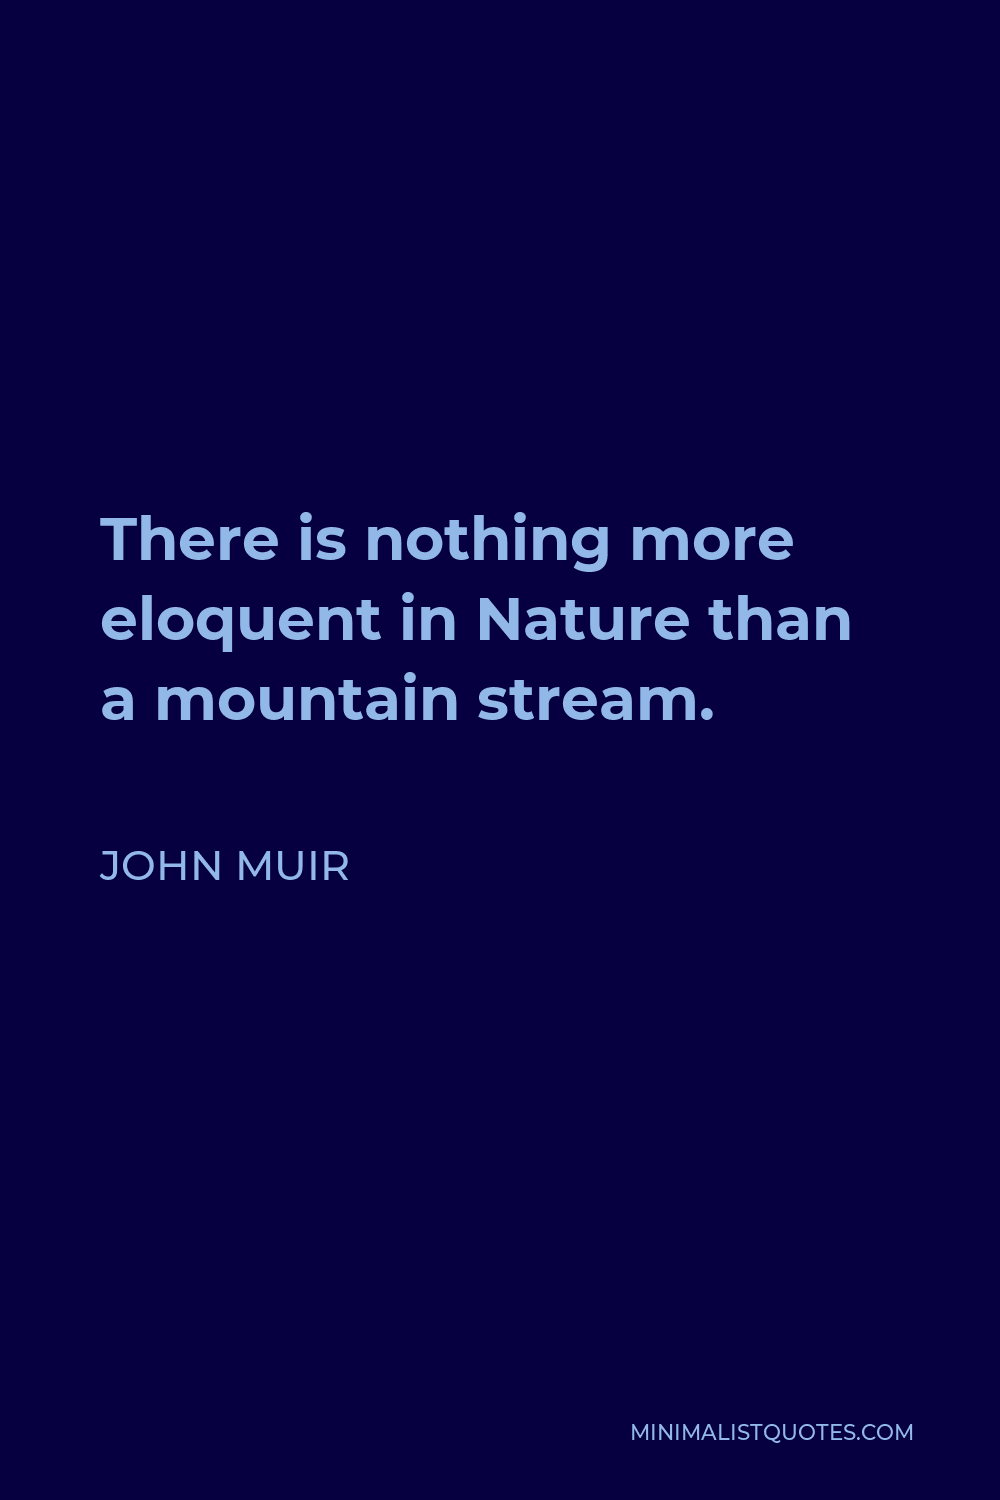 John Muir Quote - There is nothing more eloquent in Nature than a mountain stream.